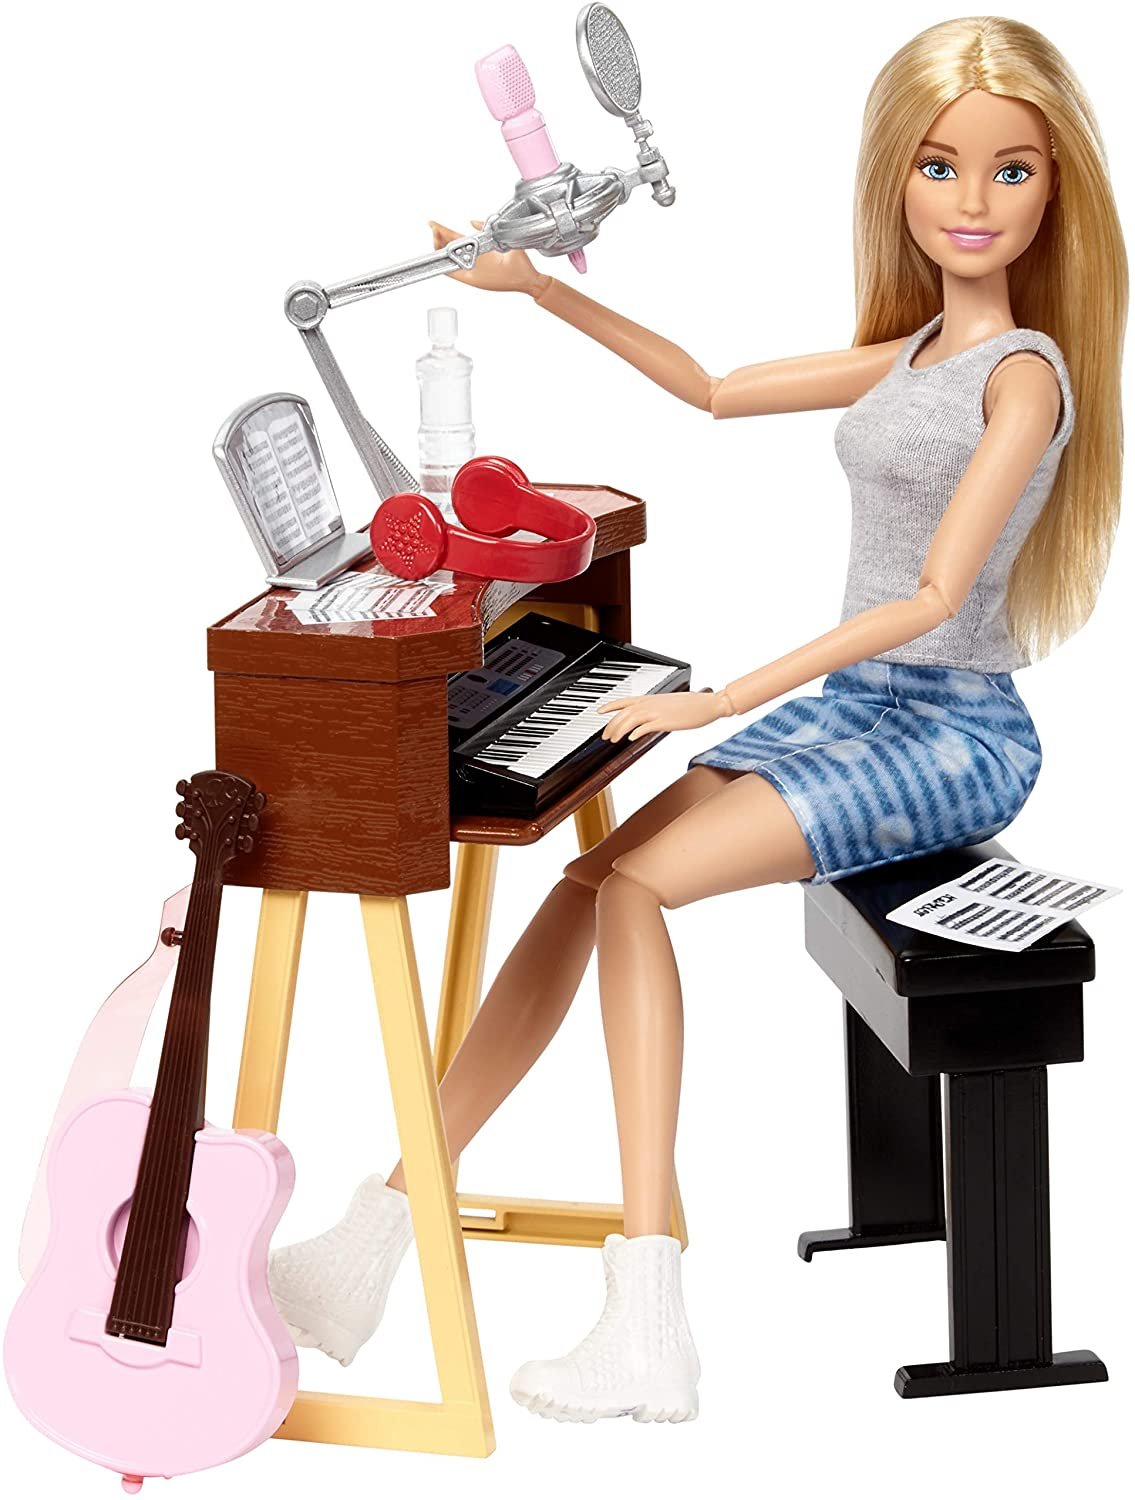 6. Barbie Musician Doll with Musical Instruments